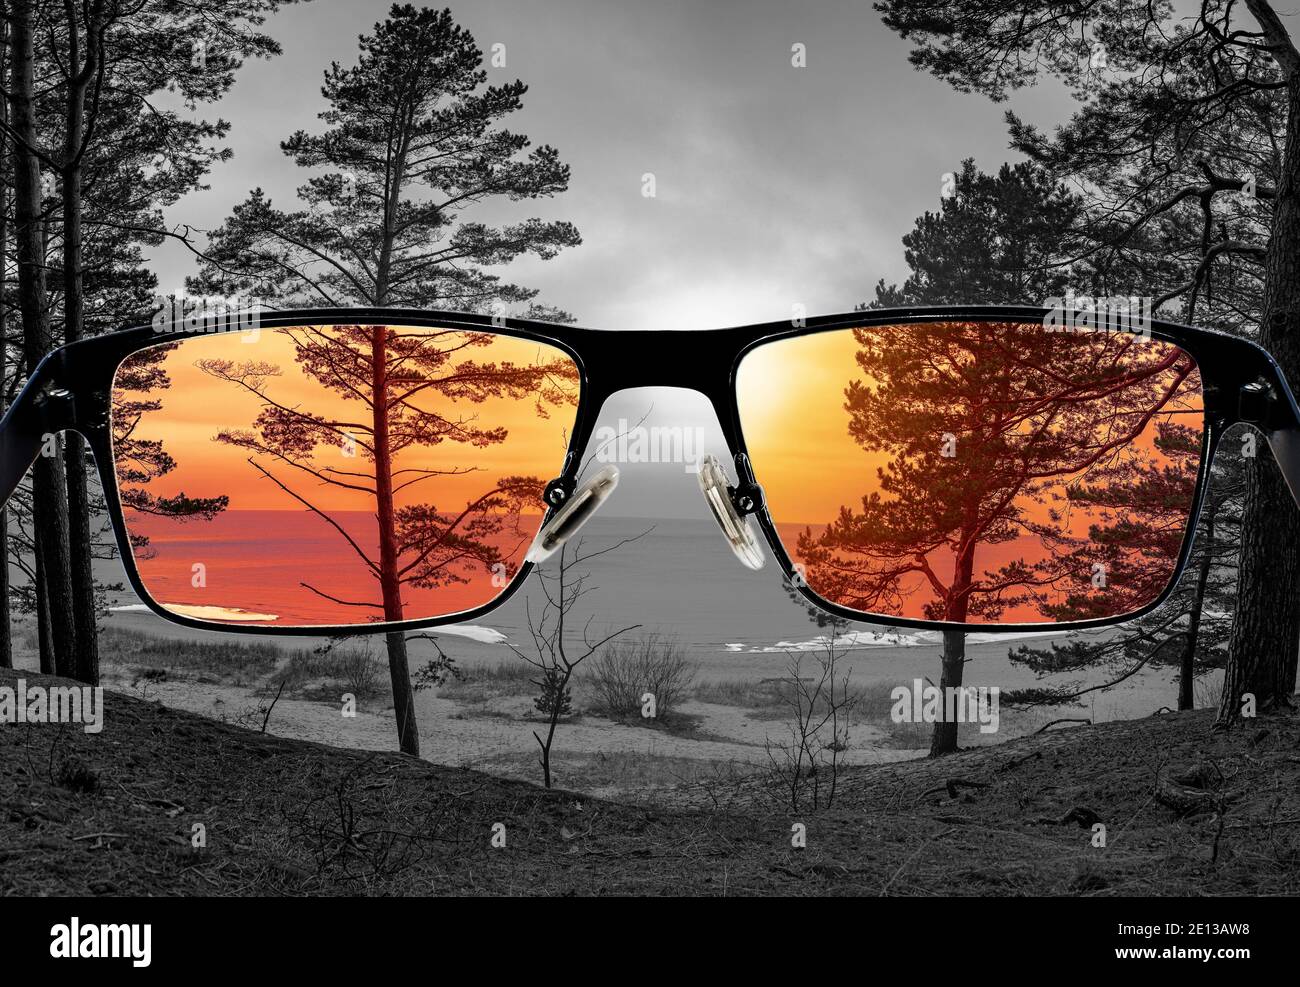 Different perception of world. Colorful view of sunset over sea and coniferous forest in  the glasses. Looking through glasses. Stock Photo